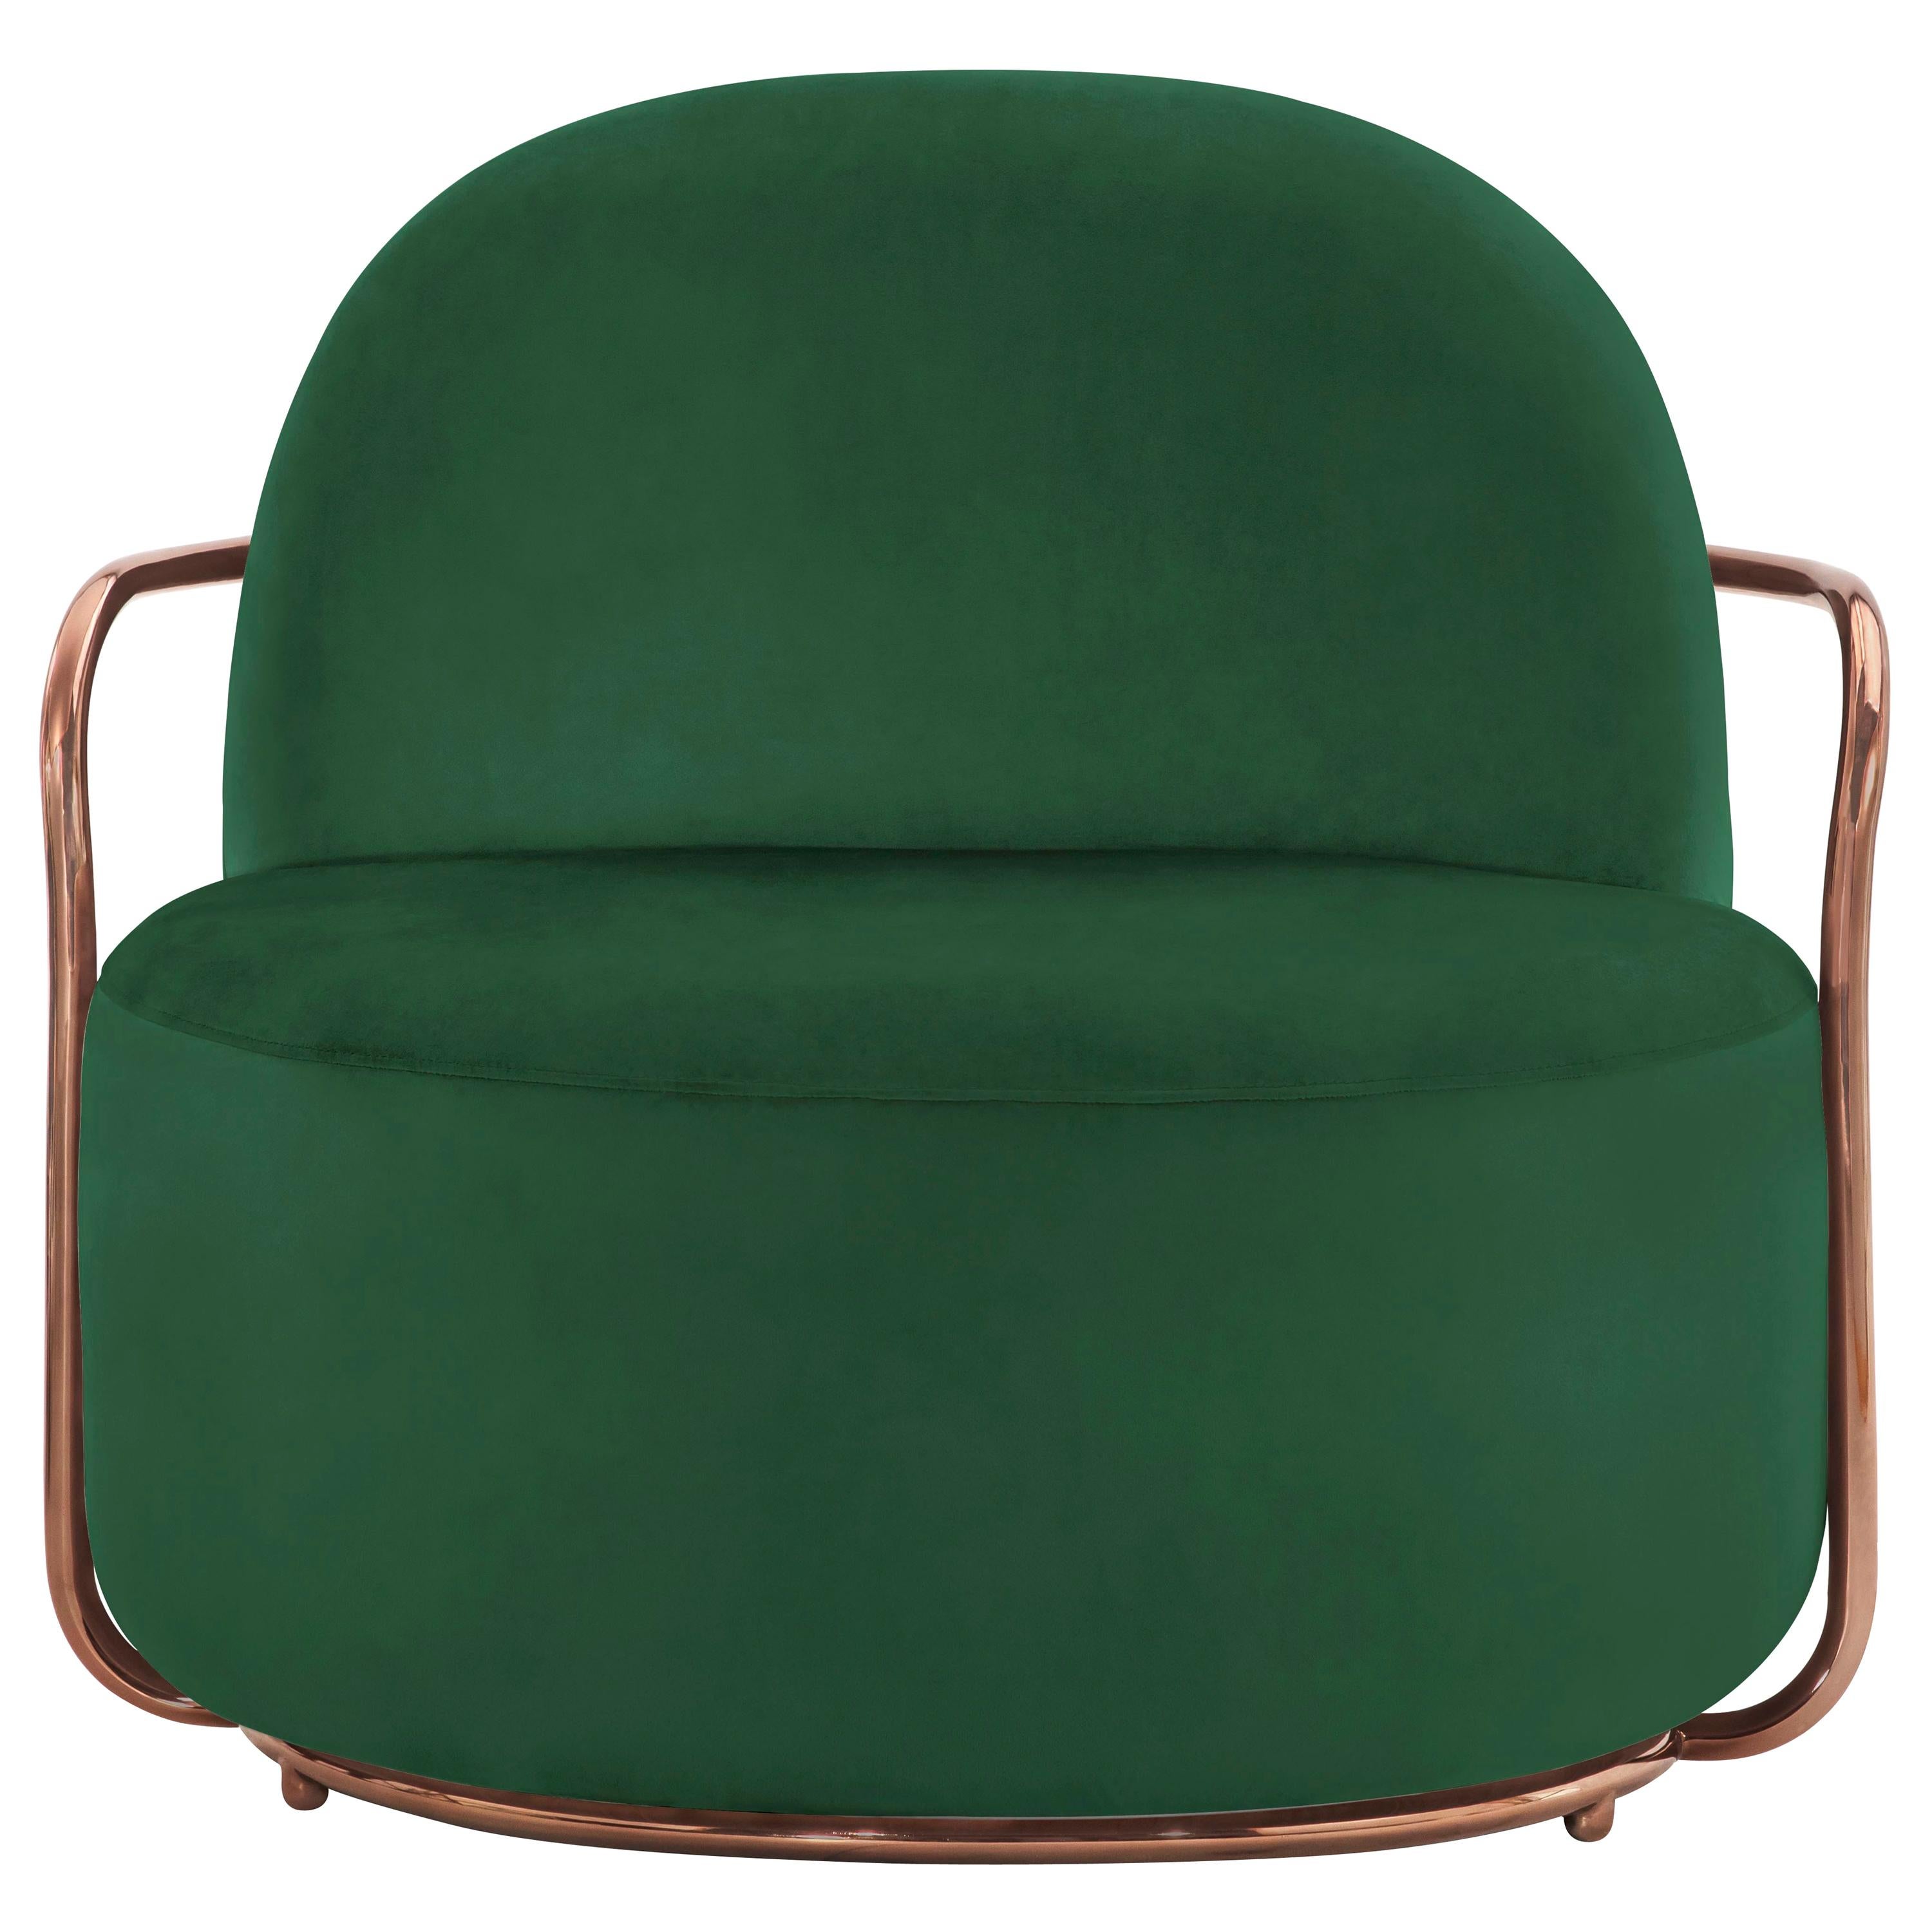 Orion Lounge Chair with Plush Green Velvet and Rose Gold Arms by Nika Zupanc